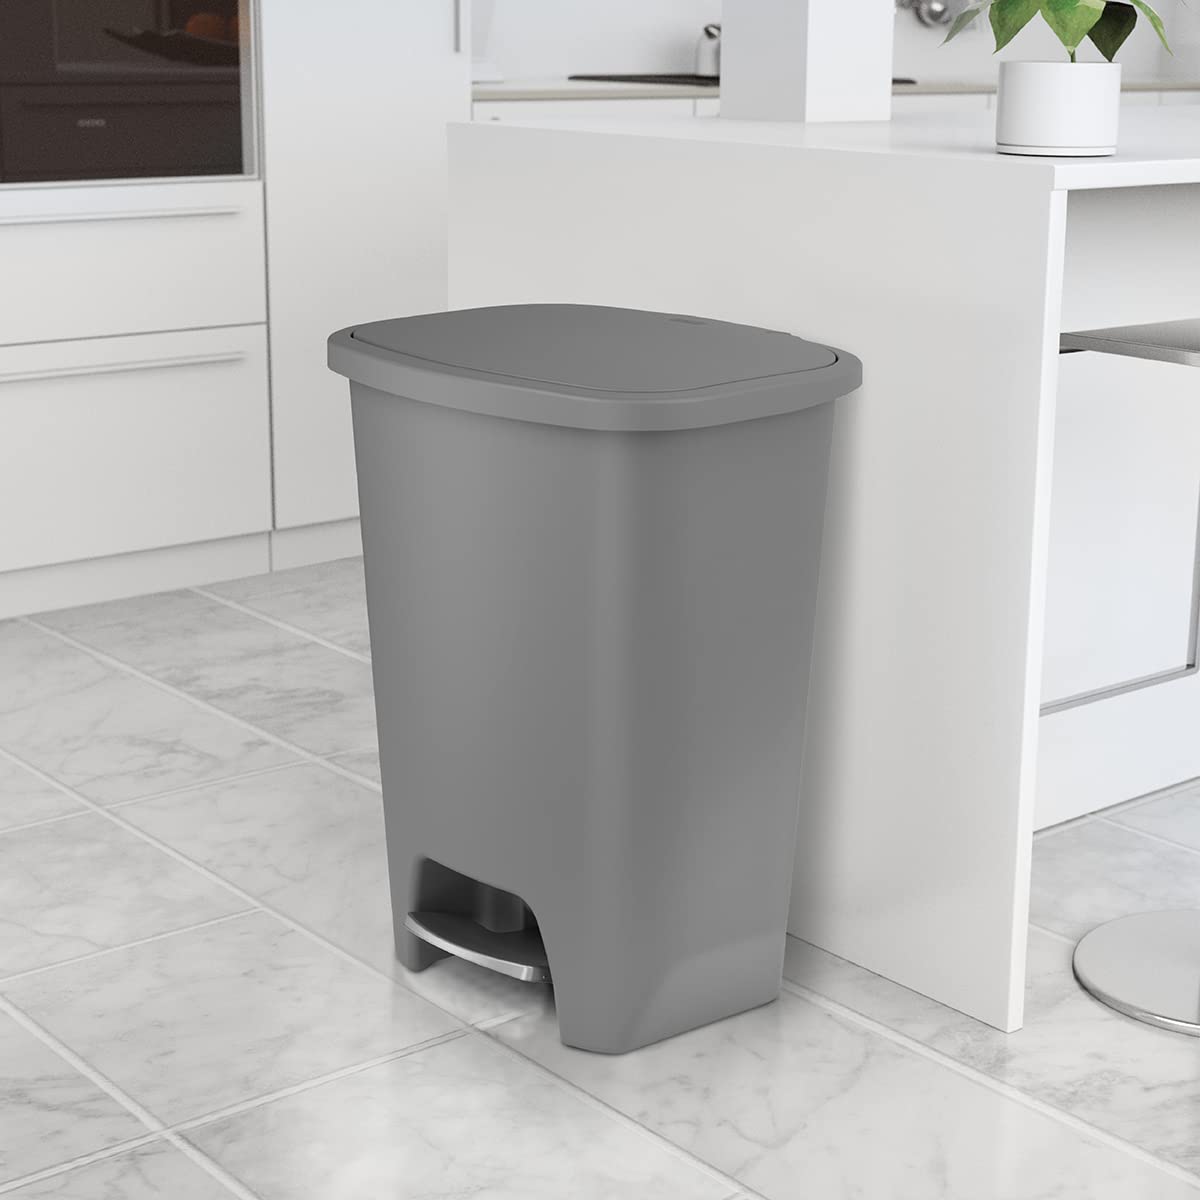 Glad Kitchen Trash Can | Large Plastic Waste Bin with Odor Protection of  Lid | Hands Free with Step On Foot Pedal and Garbage Bag Rings, 20 Gallon